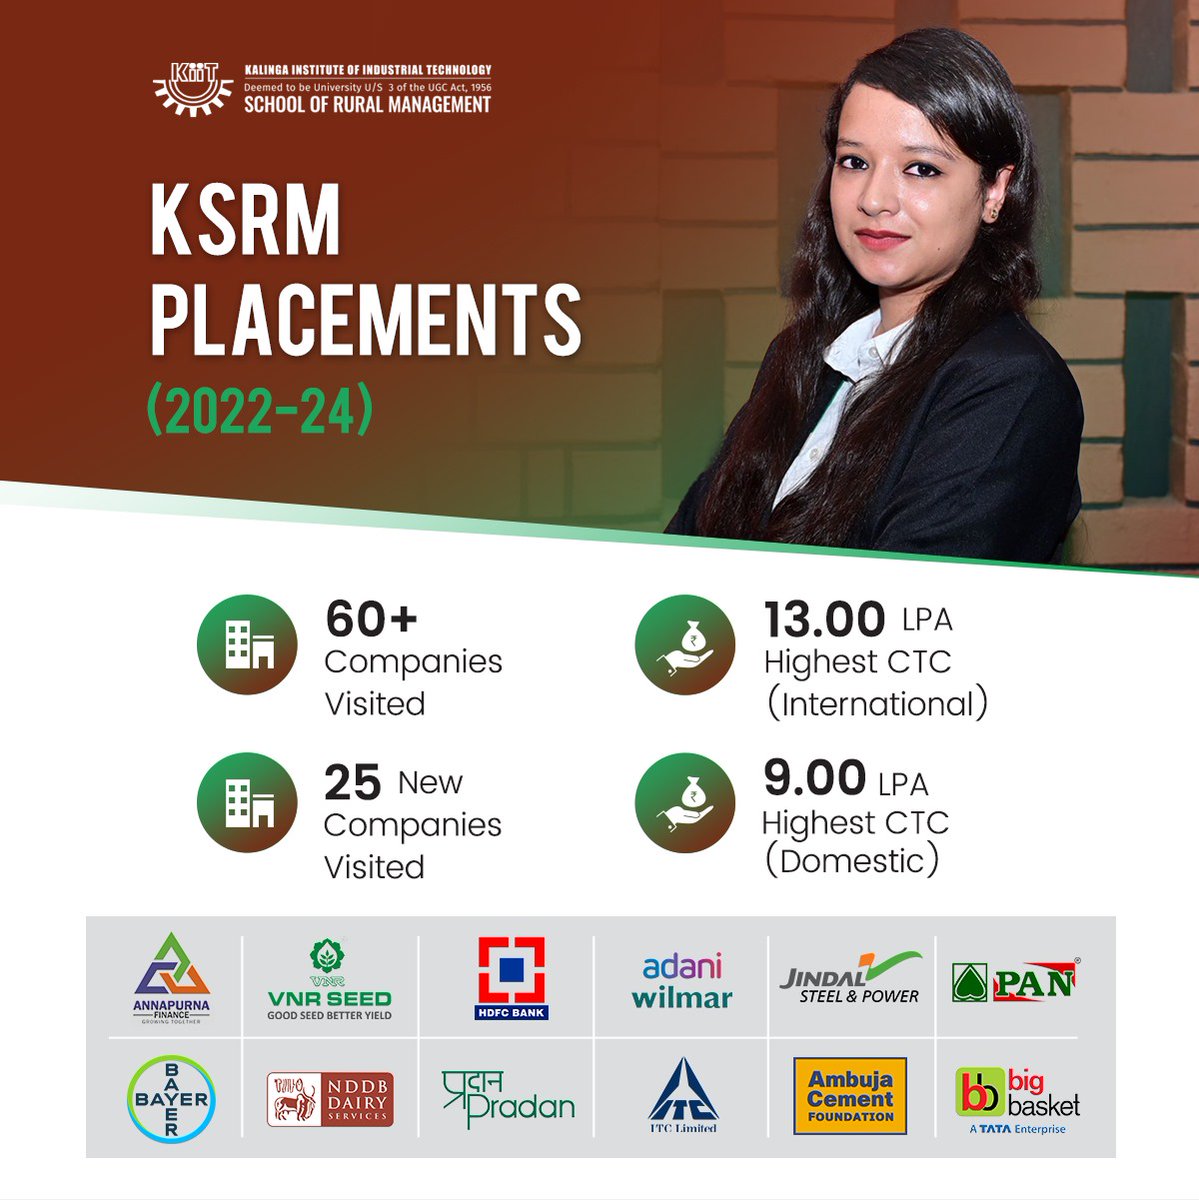 More than 60+ companies and 25 new companies visited our campus for 2022-24 recruitment. These include government departments, NGOs, semi-government organizations, CSR Agencies,
Development Funding Agencies and rural MSMEs.

Apply to our MBA in Rural Management program at